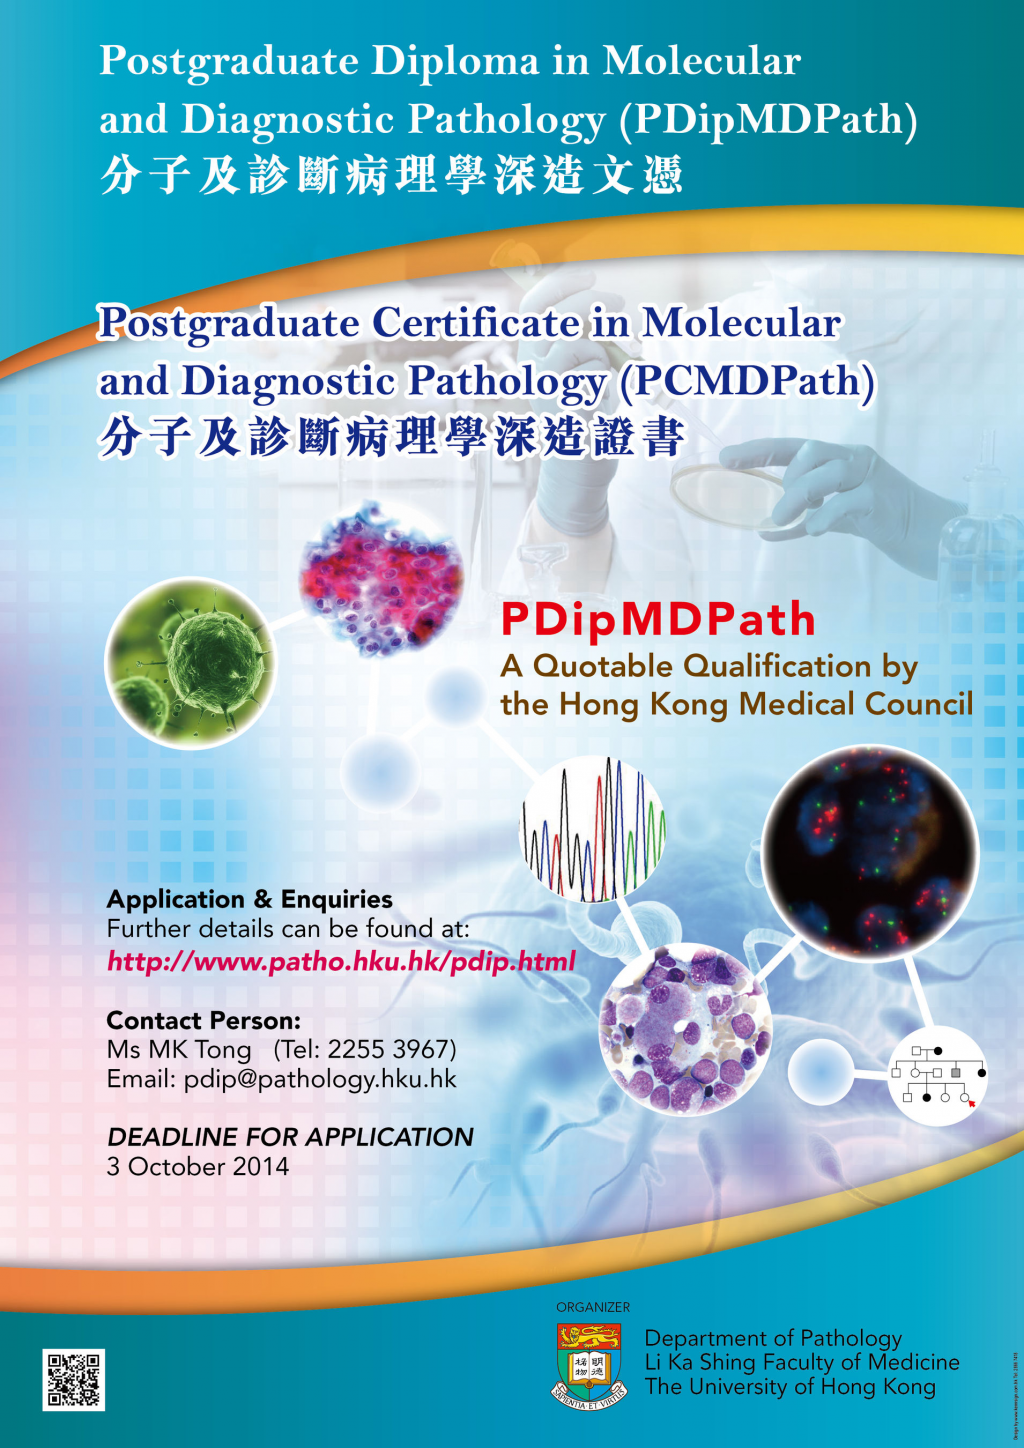 Postgraduate Diploma in Molecular and Diagnostic Pathology (Deadline for application: October 3, 2014)